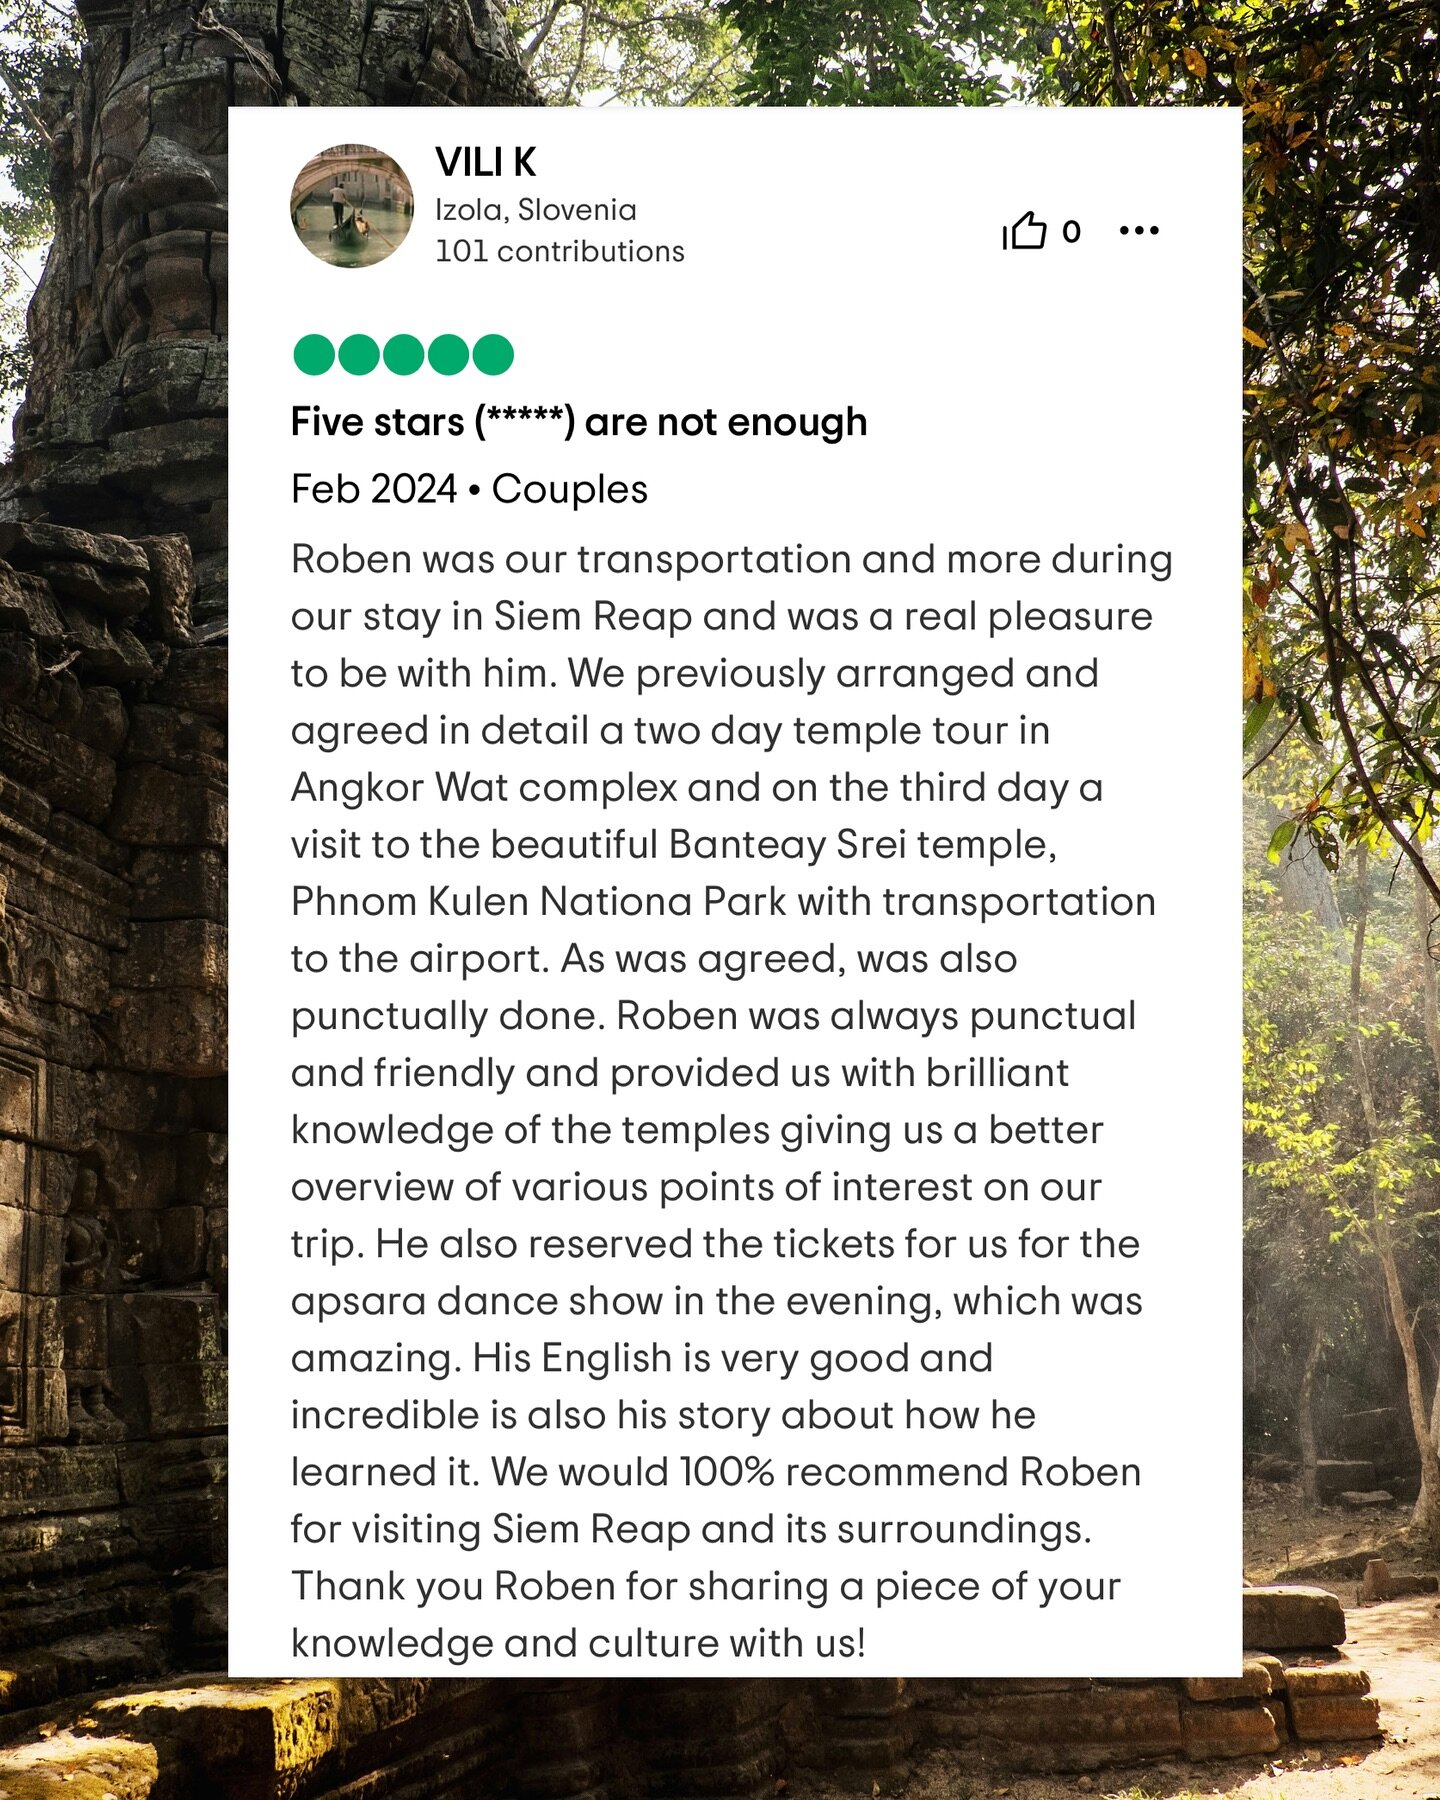 I&rsquo;m always important to offer best services possible for visiting Siem Reap. Thank you for nice review! #angkorwat #siemreap #siemreaptuktukdriver